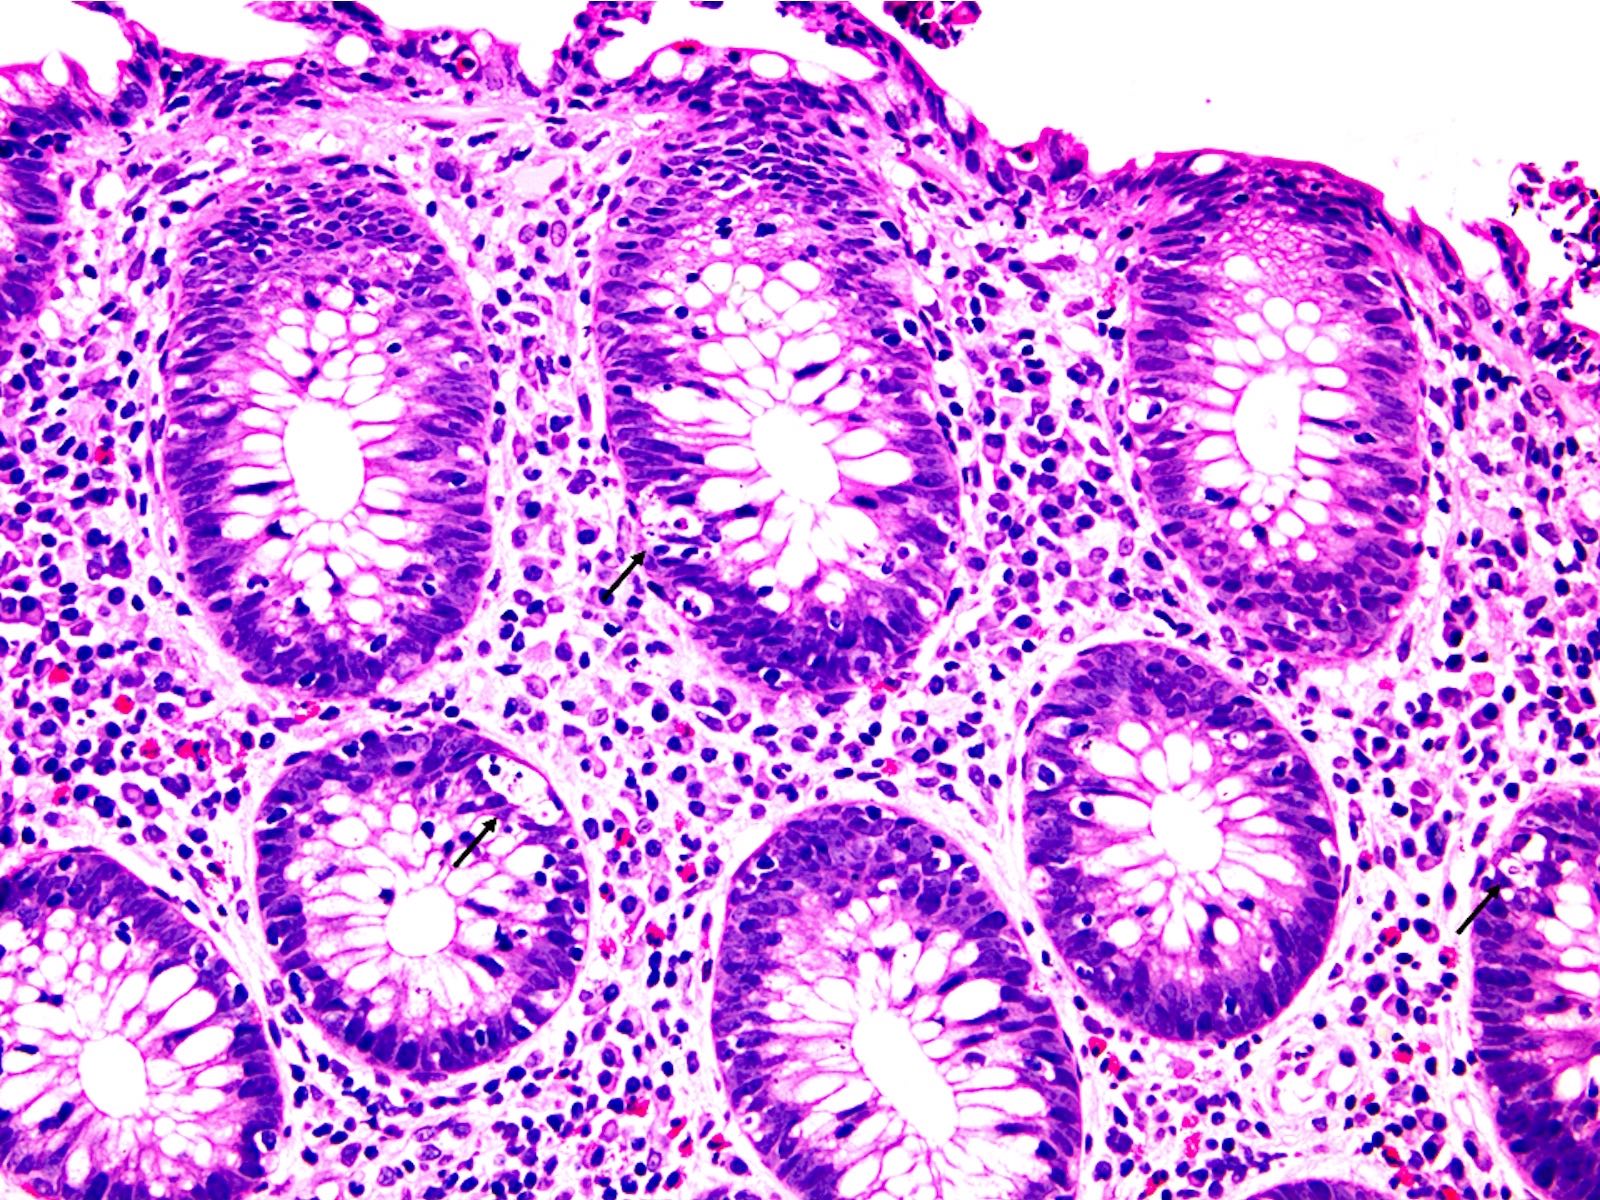 Prominent crypt epithelial cell apoptosis